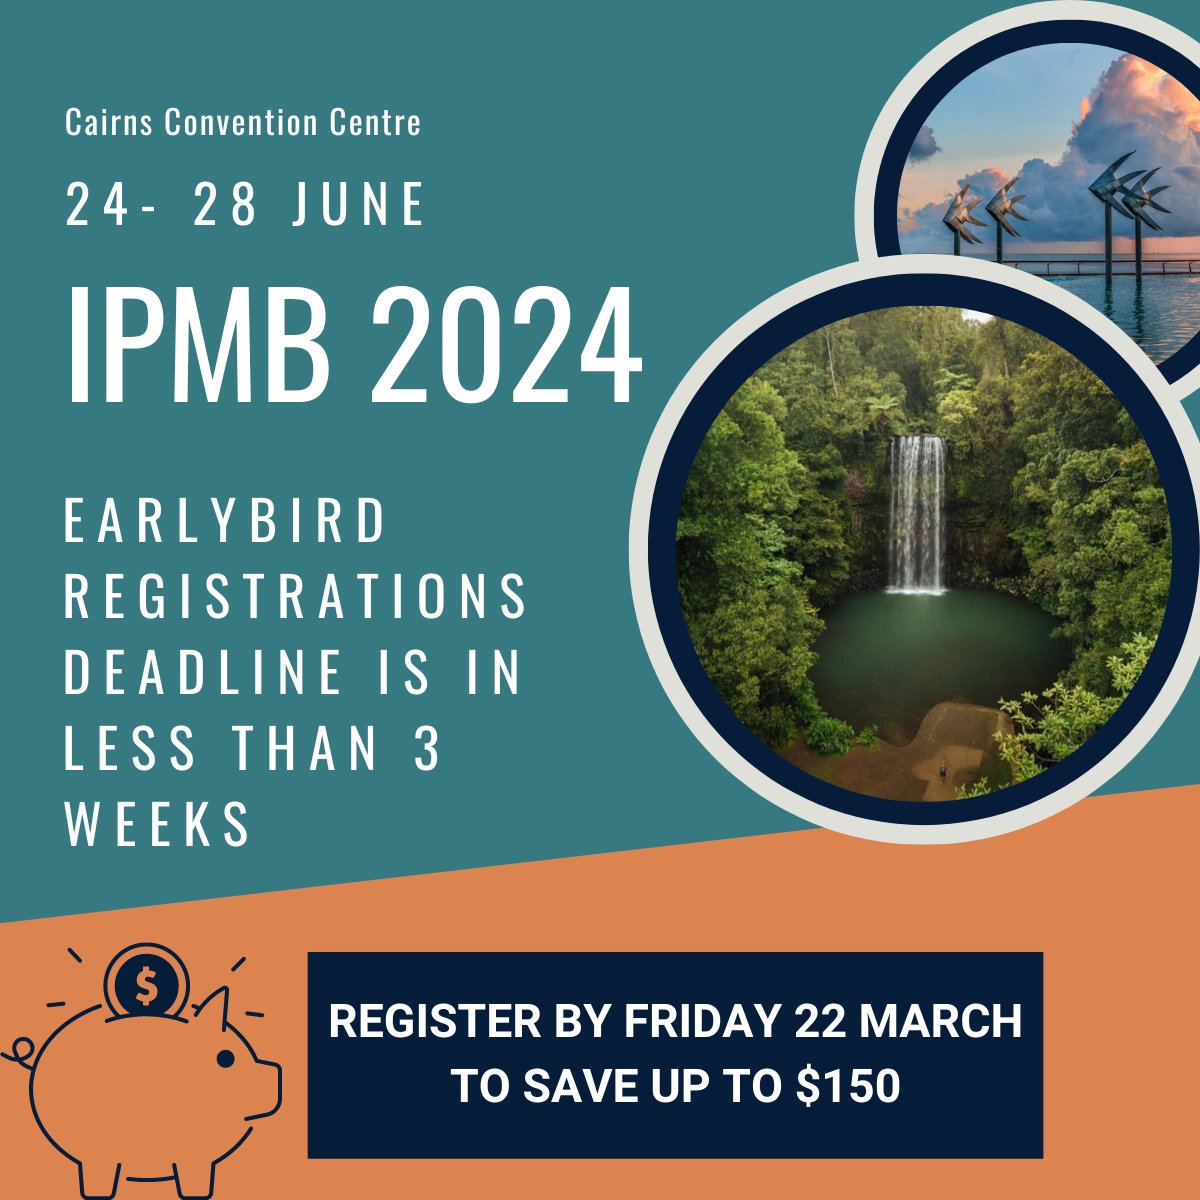 #IPMB2024 Earlybird registration deadline is in less than 3 weeks! Register by Friday 22 March to save up to $150! Visit ipmb2024.org for more information.